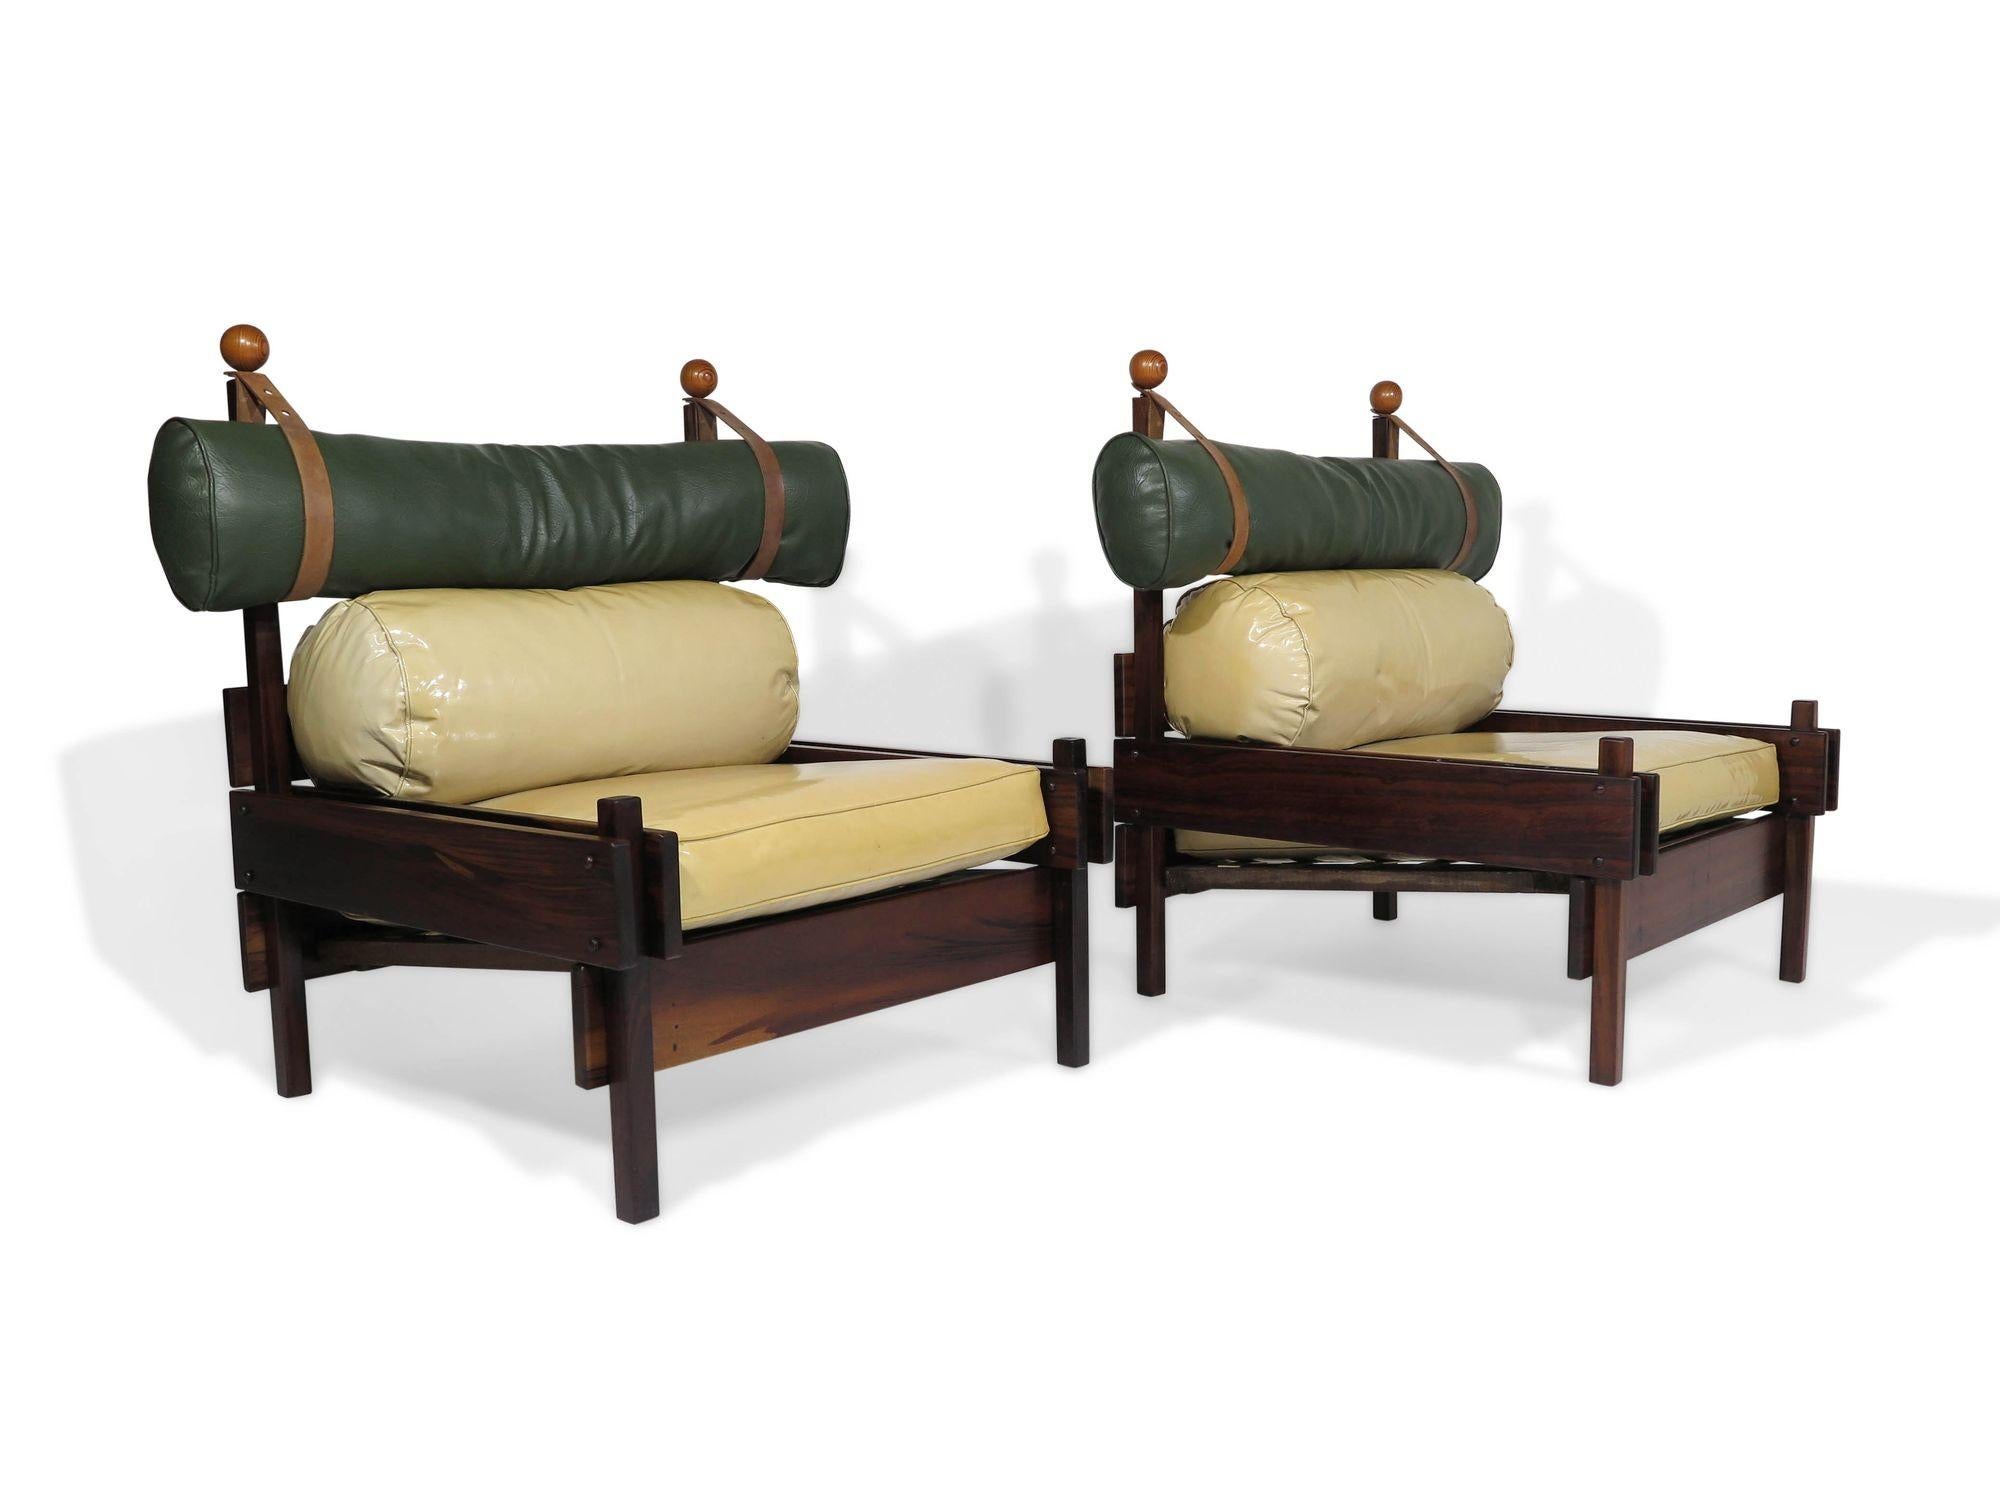 Stunning Pair of Sergio Rodrigues Tonico lounge chairs produced by OCA/Meia-Pataca in Brazil, 1962. The chairs are constructed of solid Imbuia wood and feature the original vinyl cushions with leather belts for the sculptural headrest. The cushions